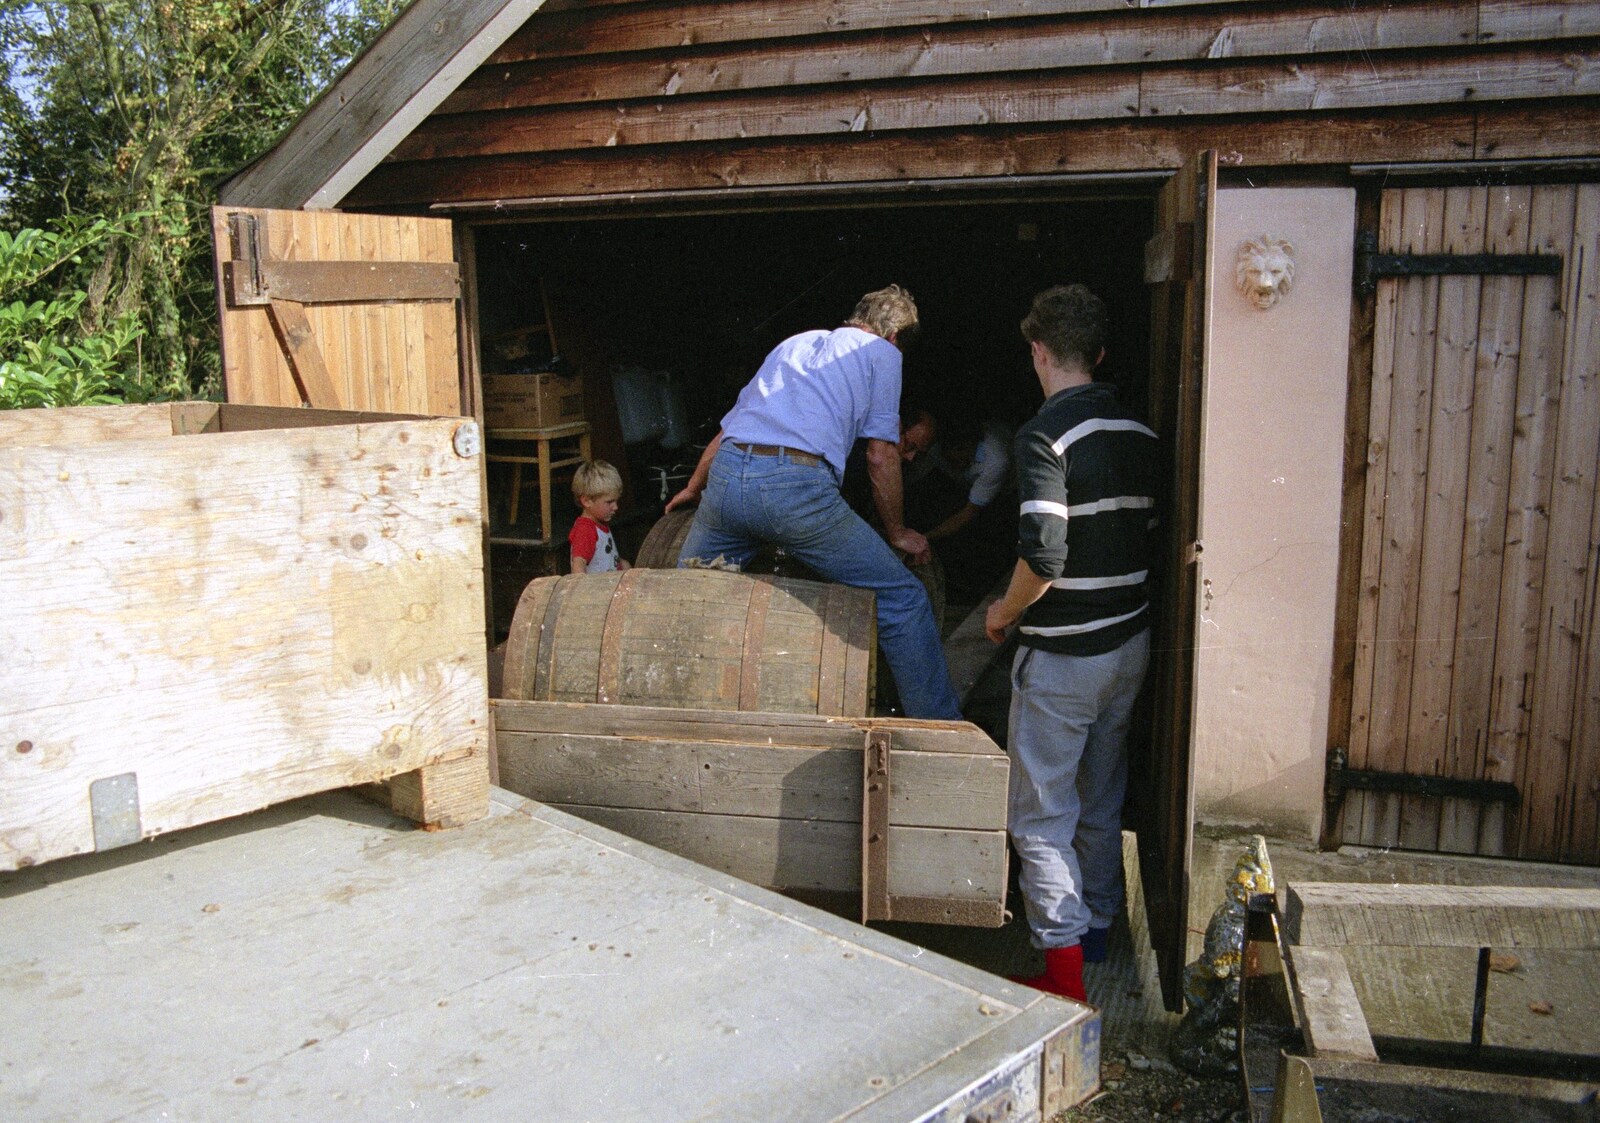 Geoff gets the barrels out of the garage from The Annual Cider Making Event, Stuston, Suffolk - 11th October 1990